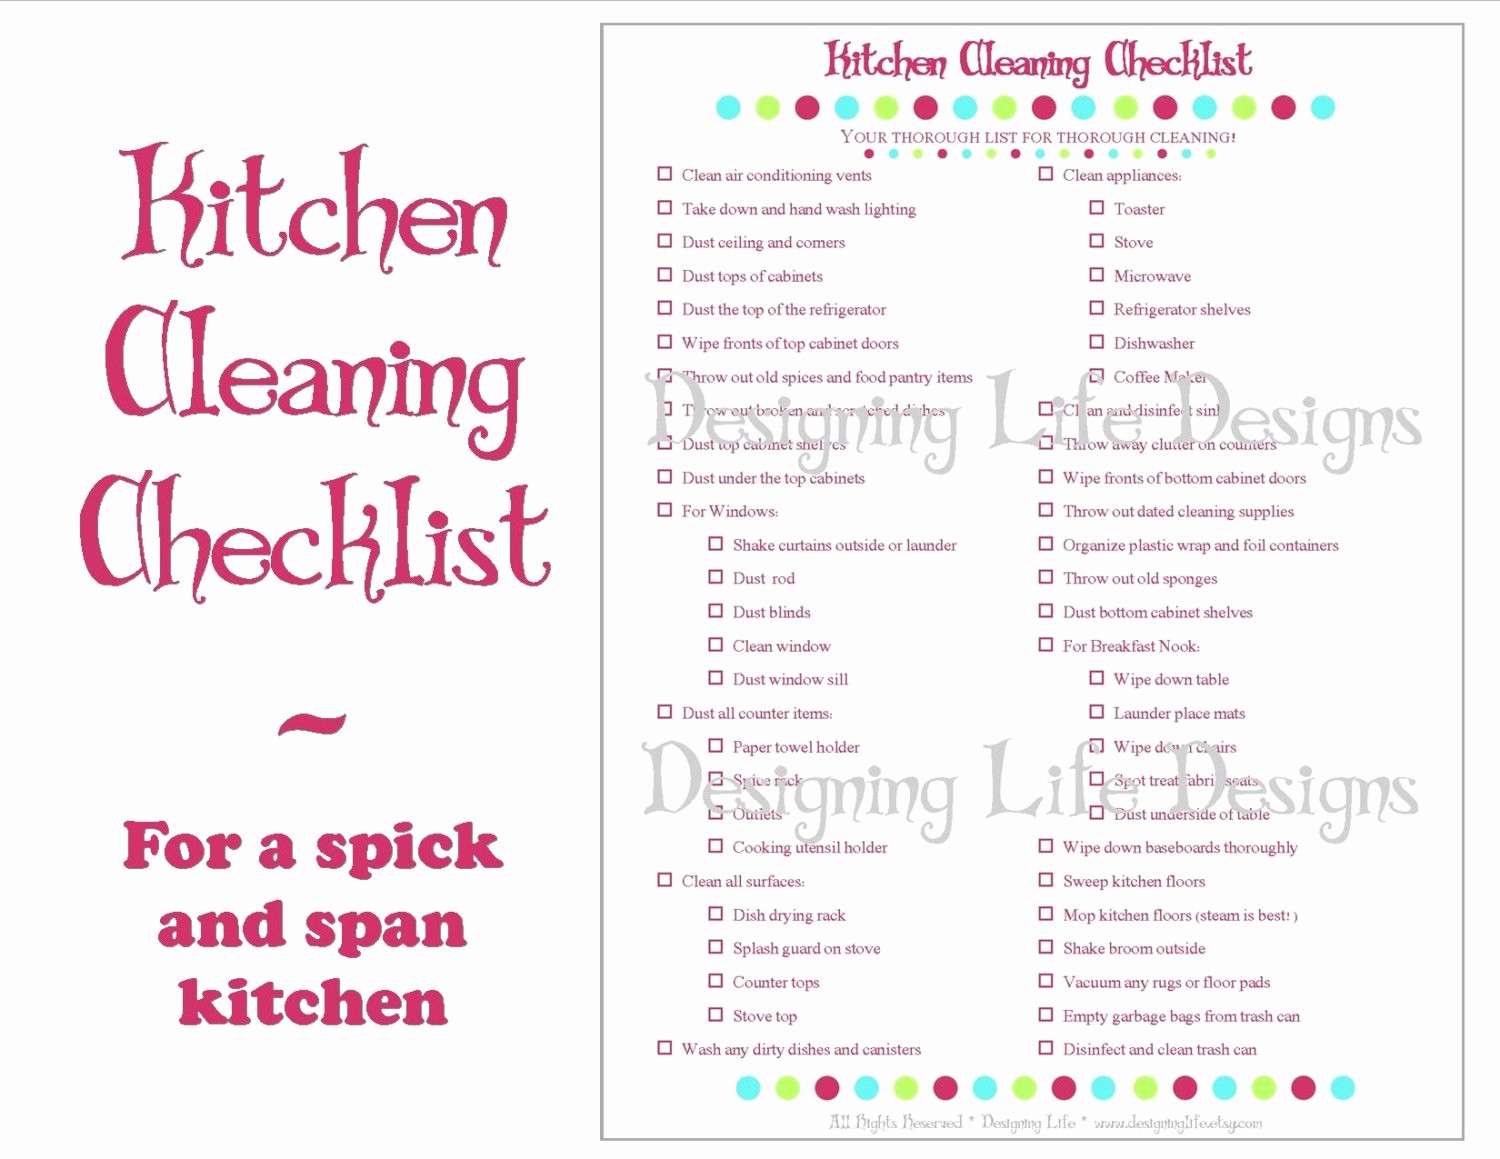 Setting Up An Office Checklist Luxury Kitchen Cleaning Checklist Pdf Printable Home Management